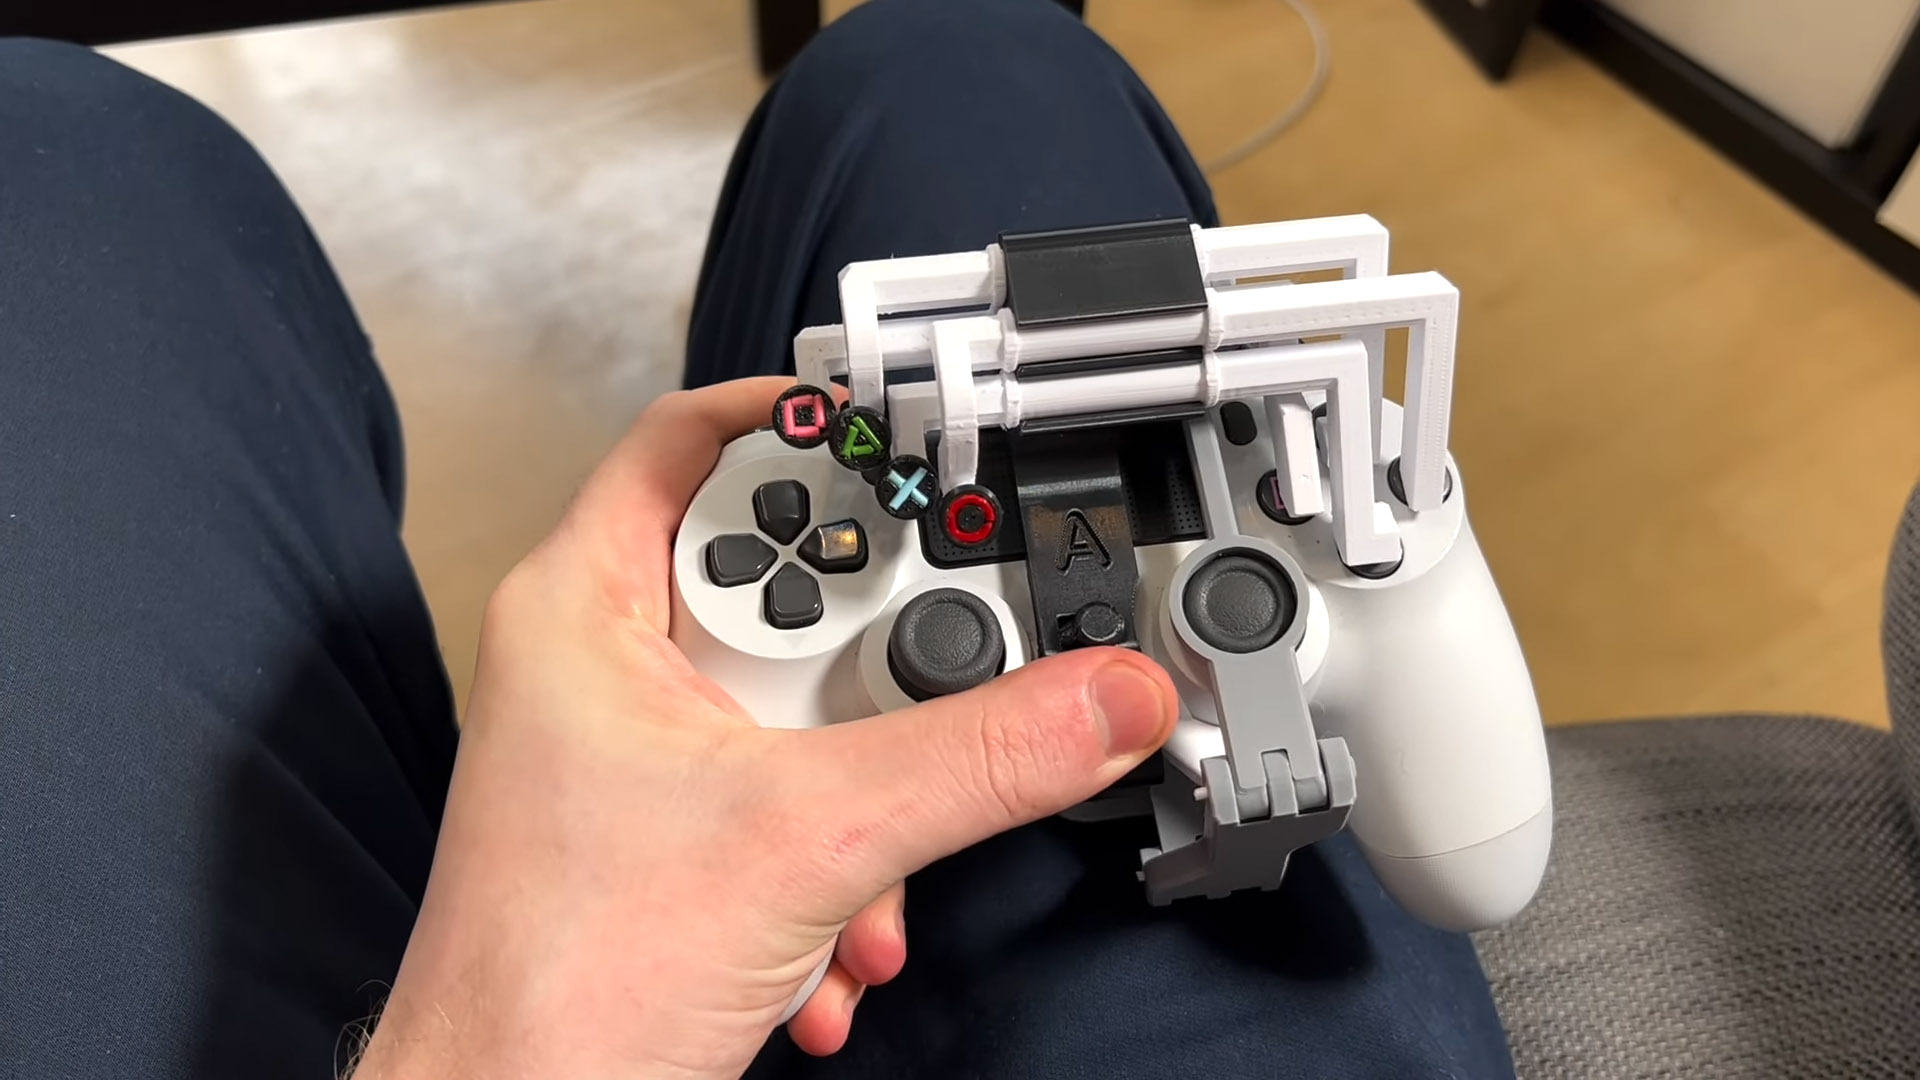 Continent dauw Auroch 3D-printed PlayStation controller mod allows one-handed PS4 and PS5 gaming  - NotebookCheck.net News